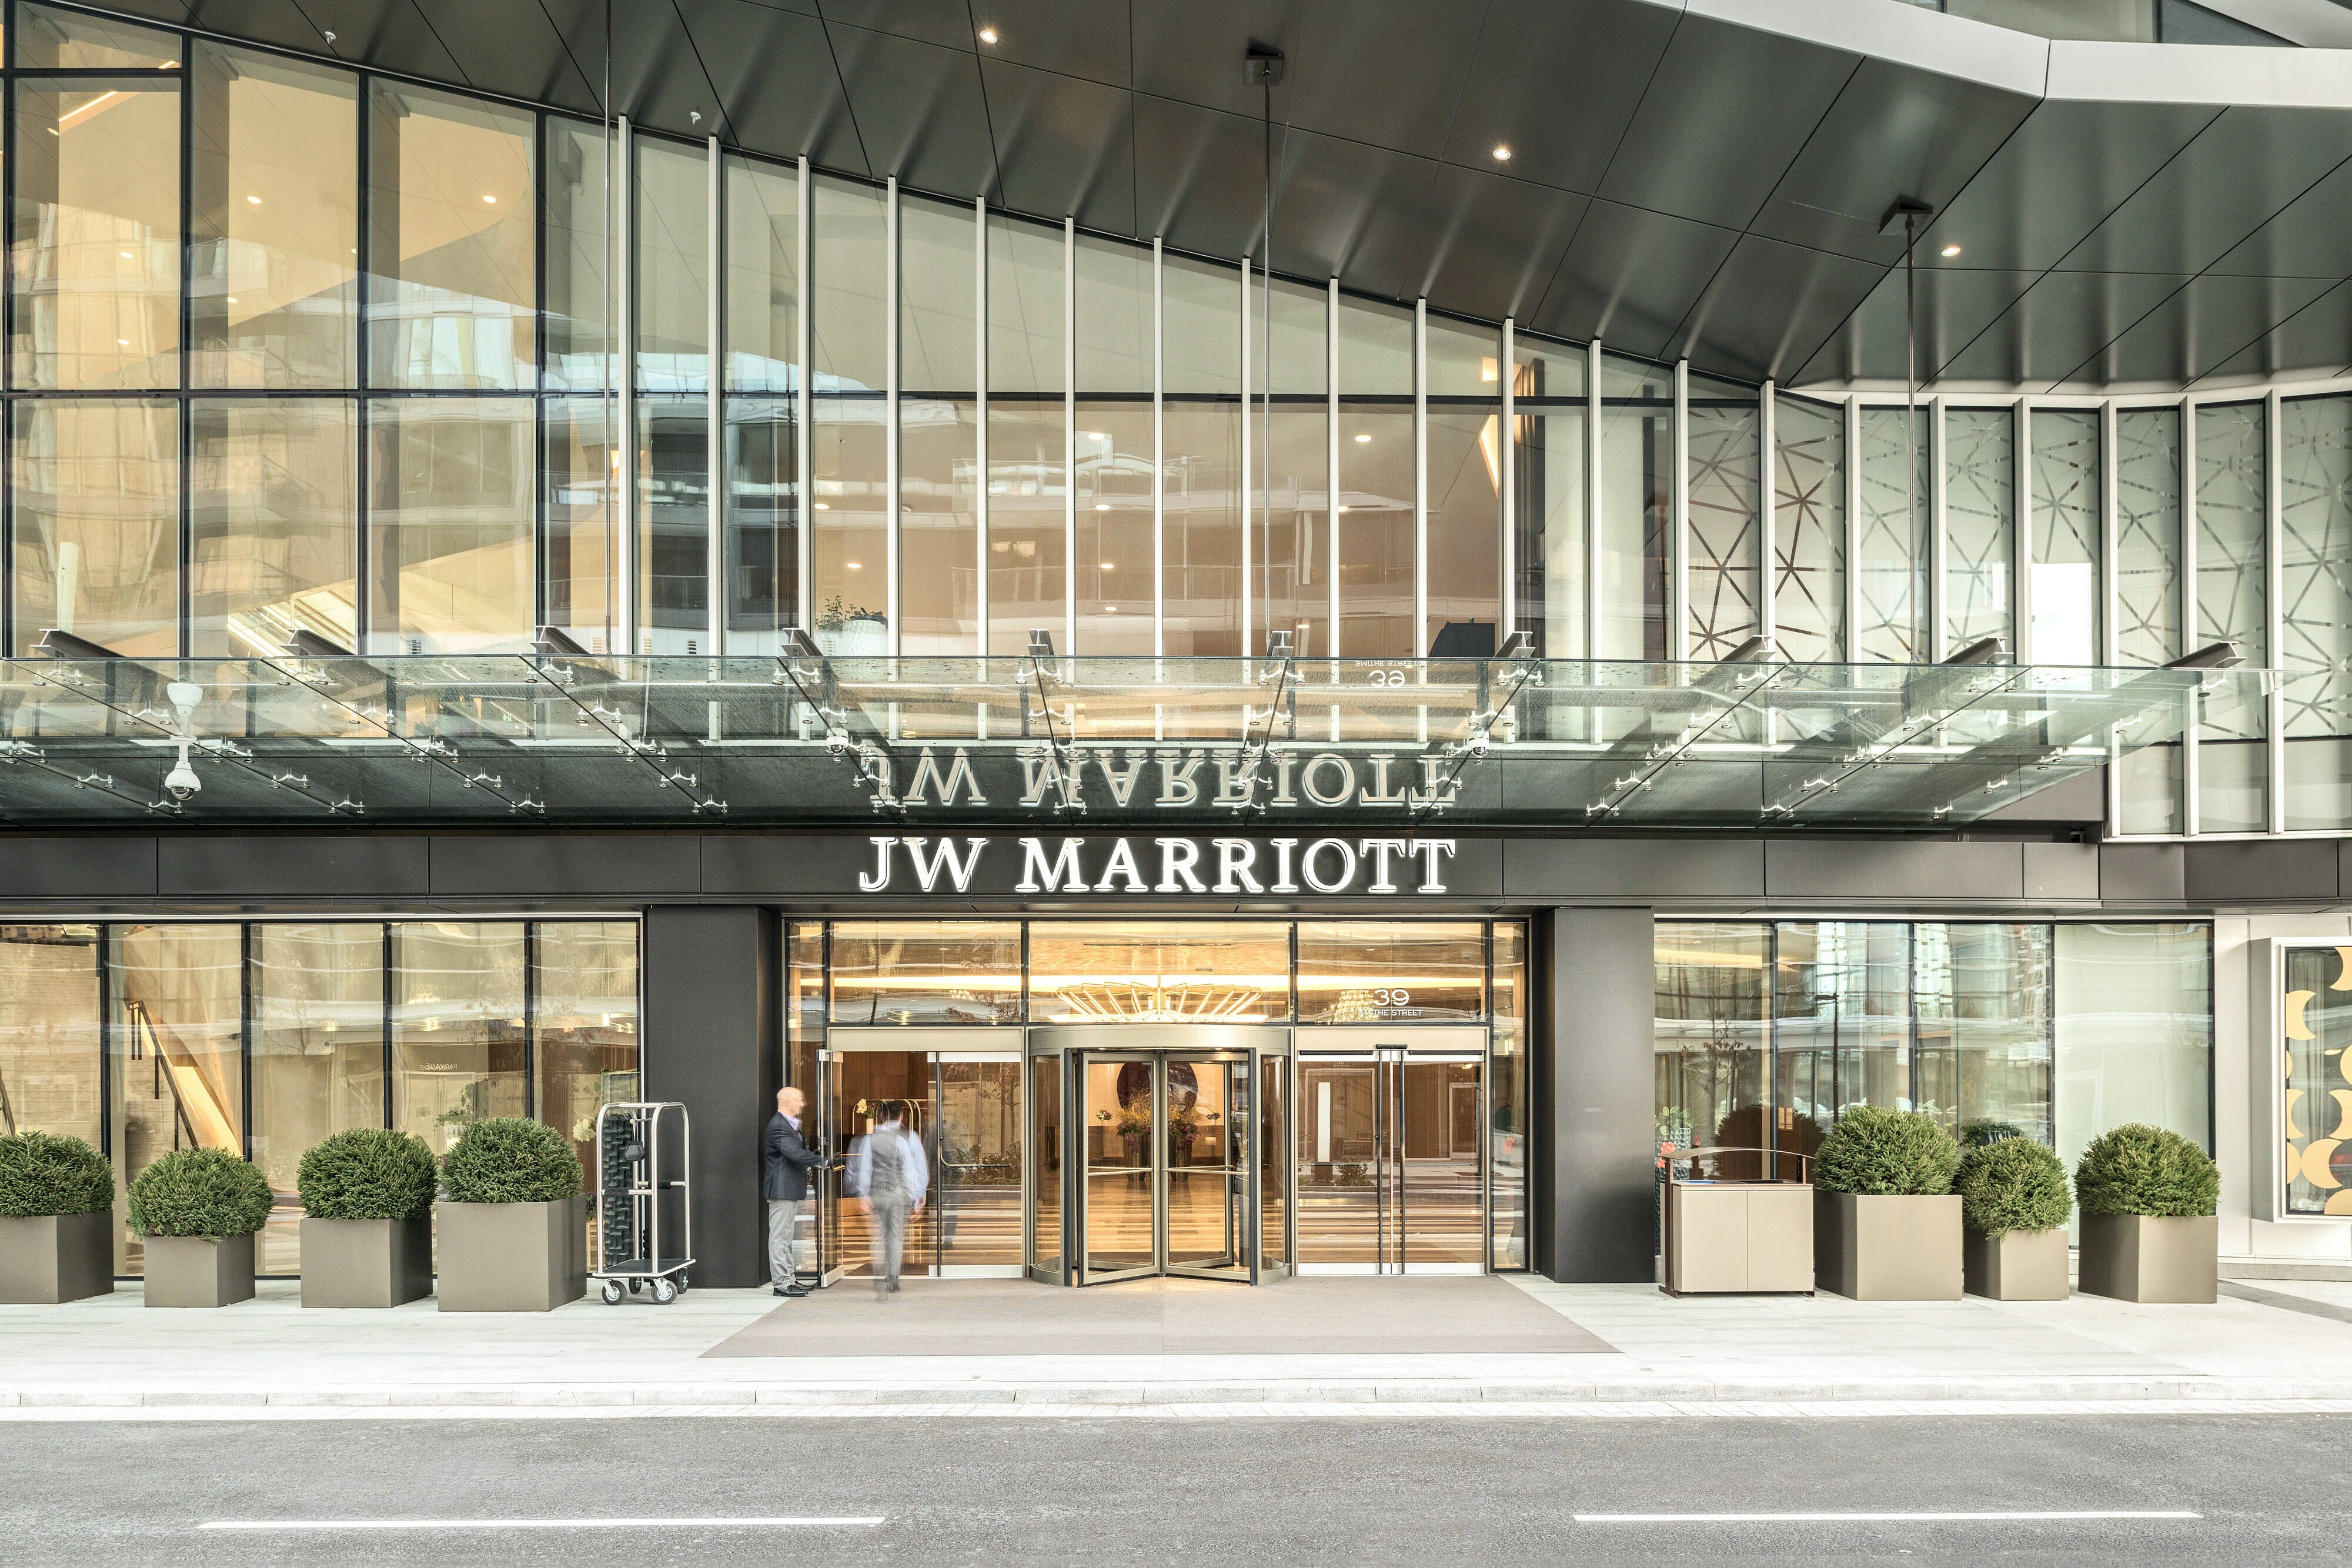 Photo of JW Marriott Parq Vancouver, Vancouver, BC, Canada